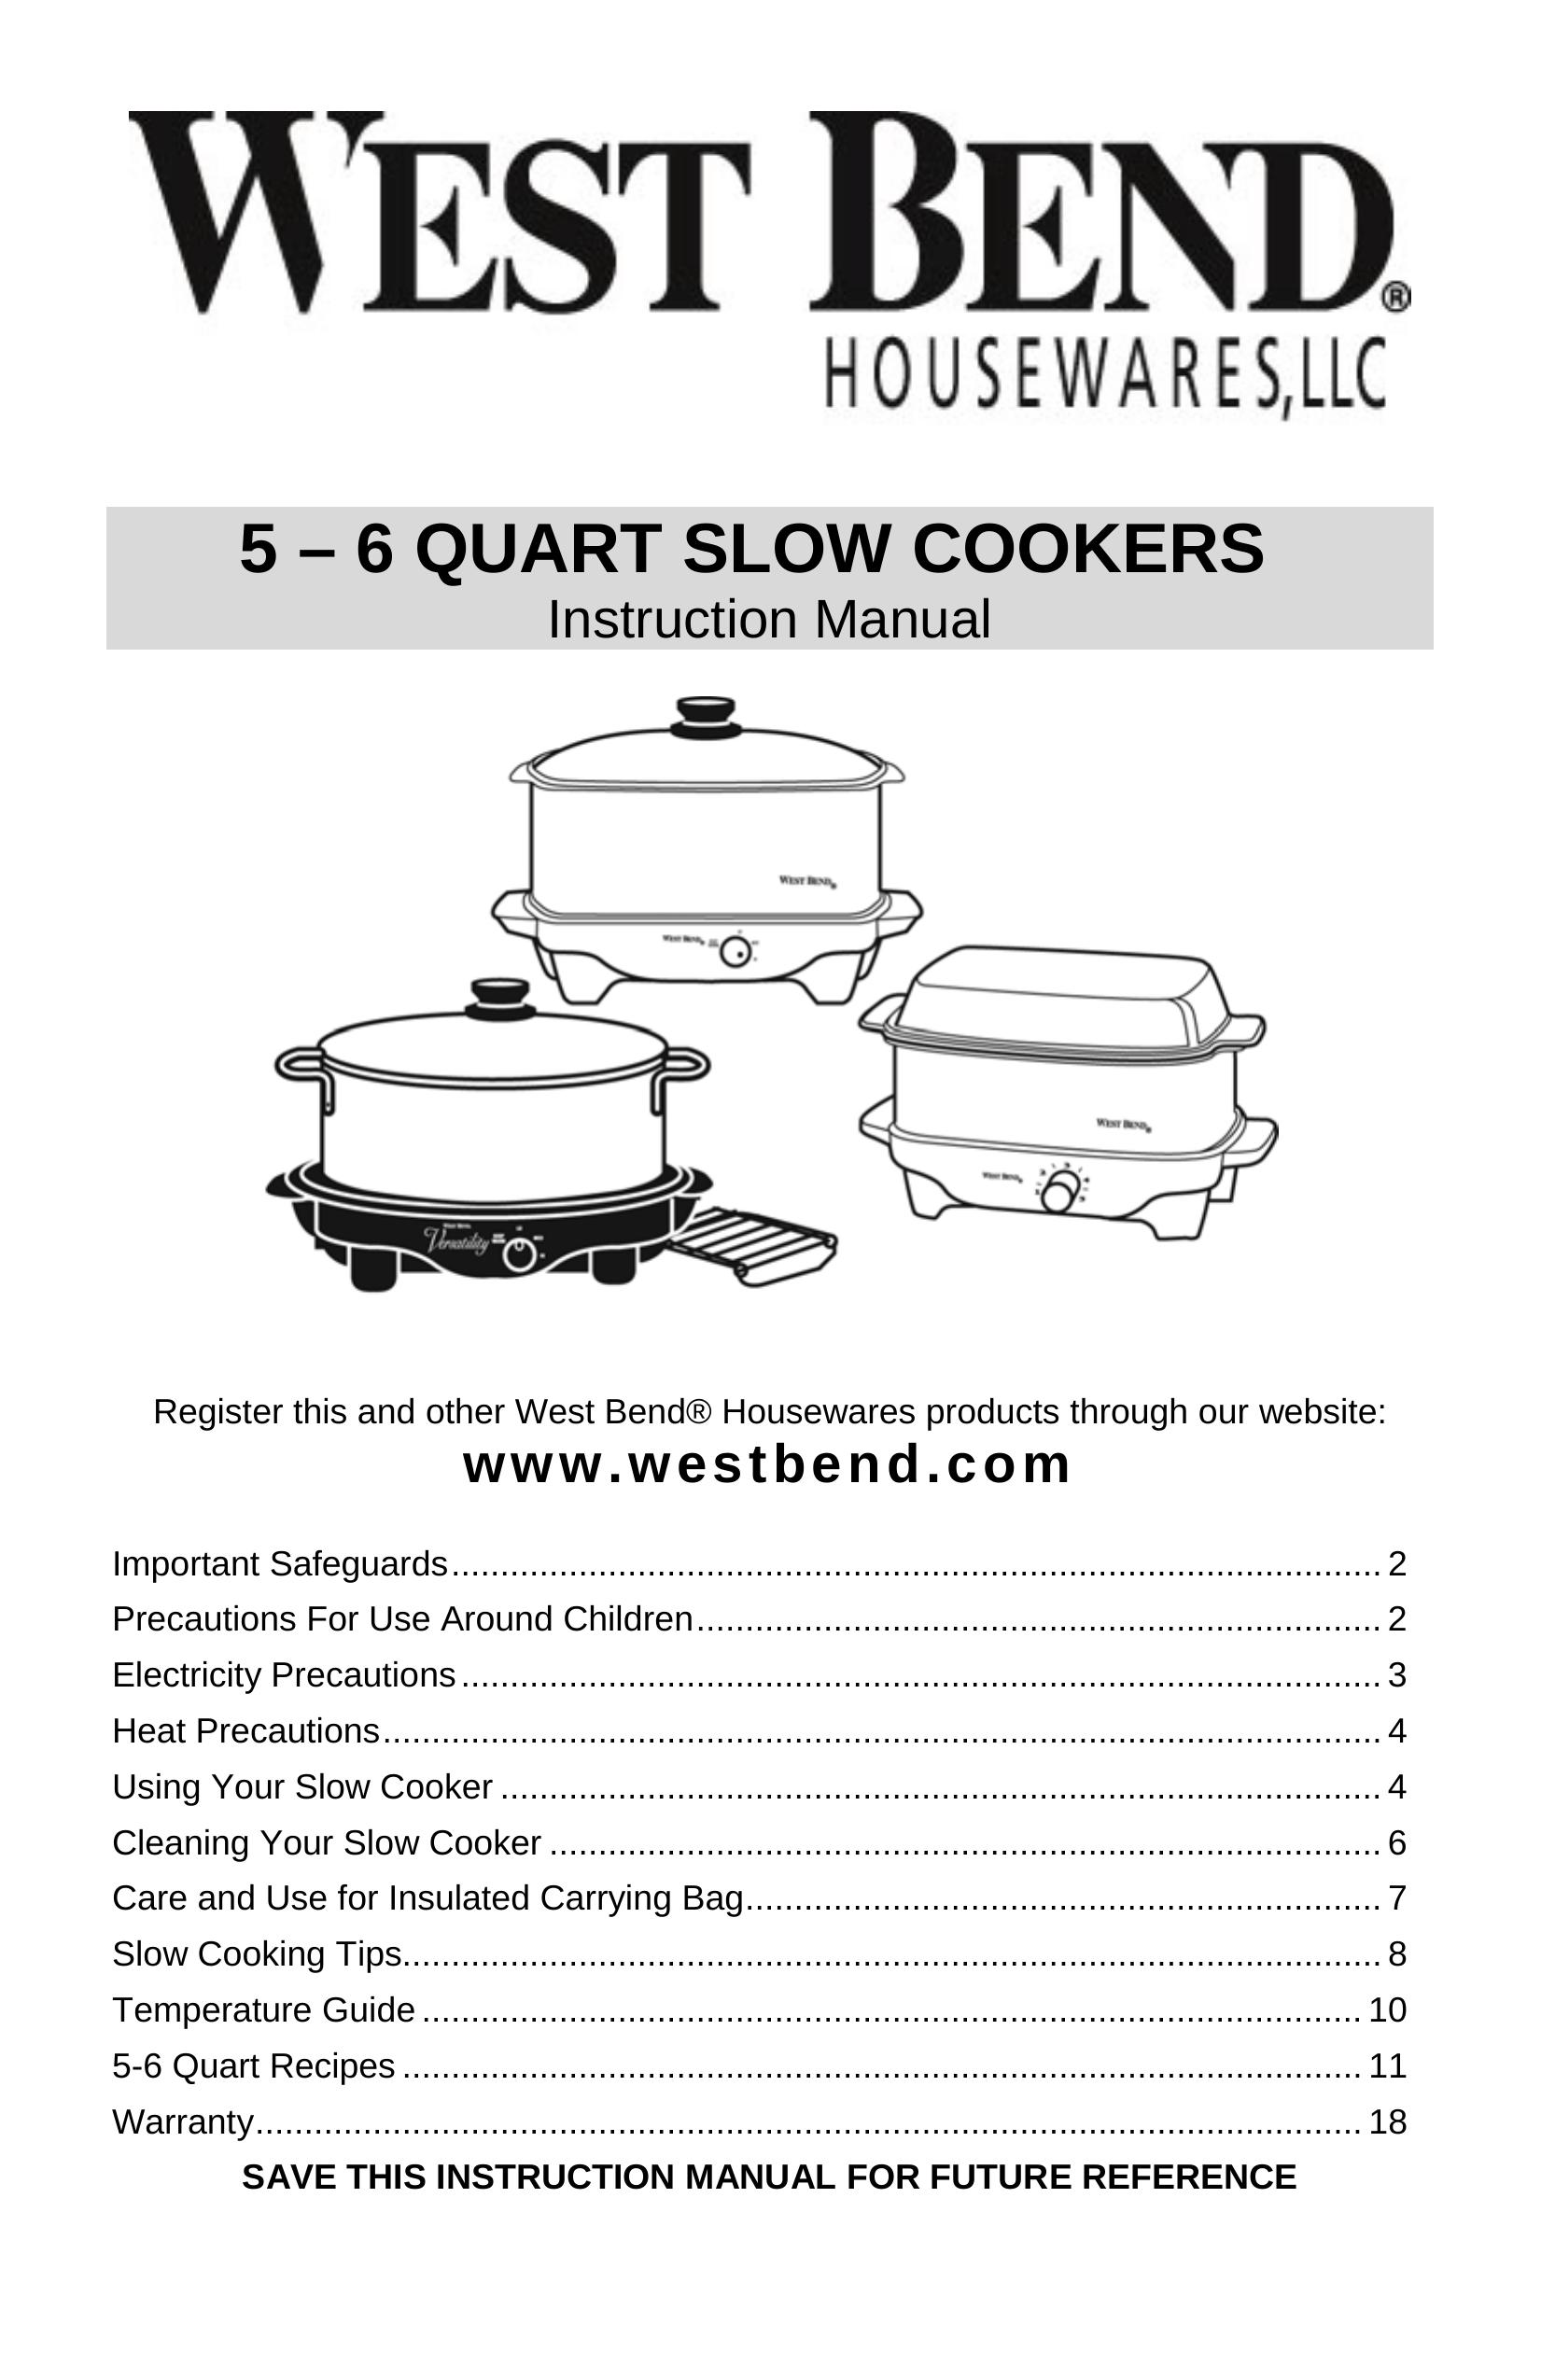 West Bend 5-6 QUART SLOW COOKERS Slow Cooker User Manual